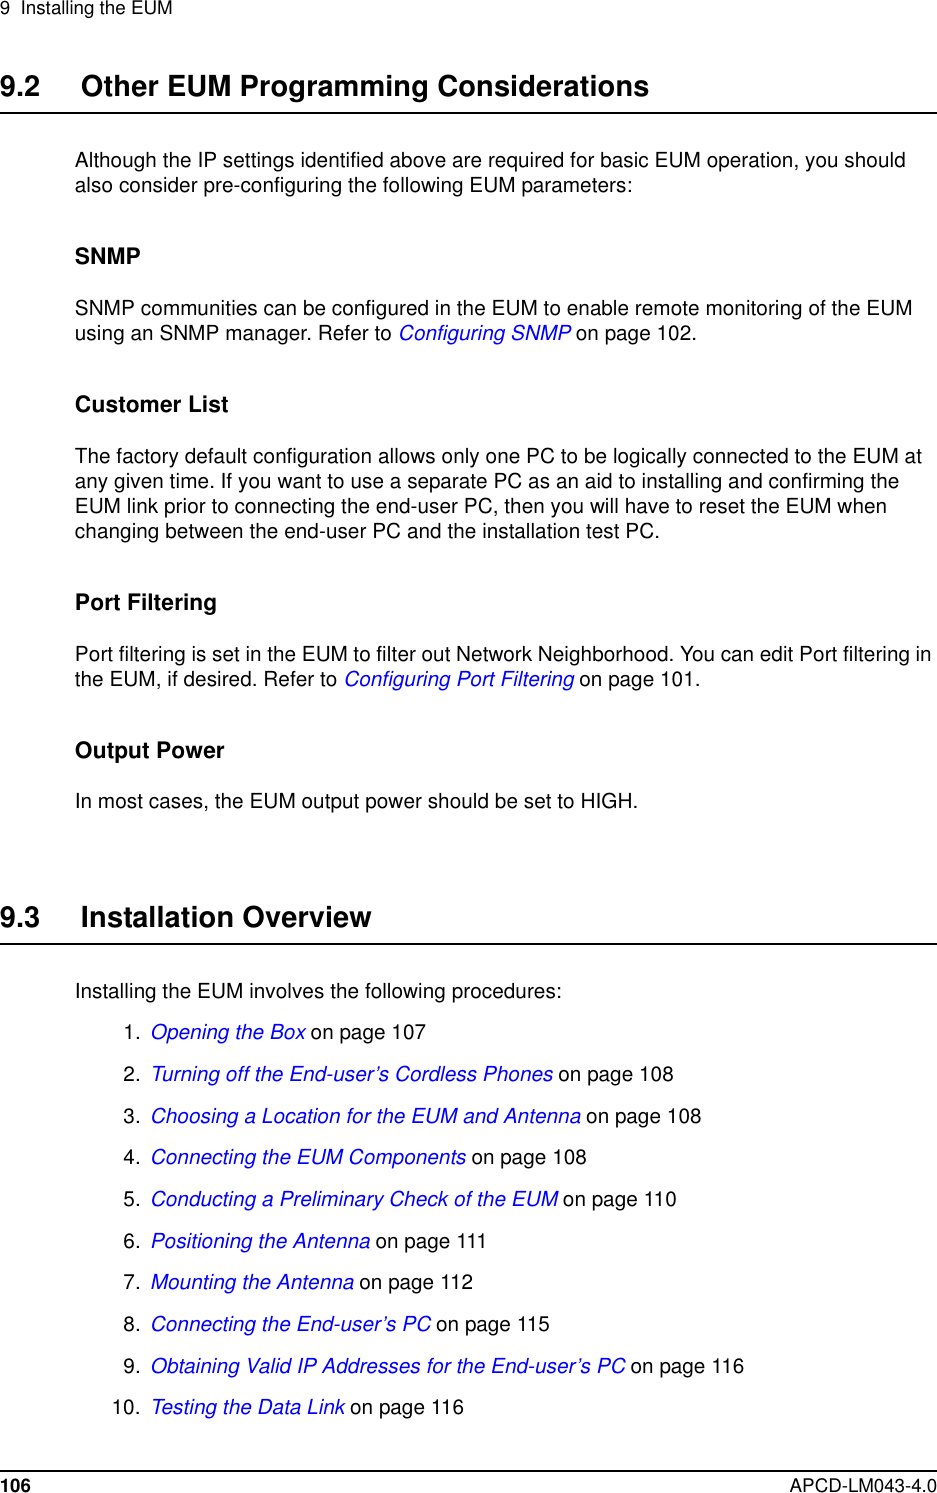 9 Installing the EUM106 APCD-LM043-4.09.2 Other EUM Programming ConsiderationsAlthough the IP settings identified above are required for basic EUM operation, you shouldalso consider pre-configuring the following EUM parameters:SNMPSNMP communities can be configured in the EUM to enable remote monitoring of the EUMusing an SNMP manager. Refer to Configuring SNMP on page 102.Customer ListThe factory default configuration allows only one PC to be logically connected to the EUM atany given time. If you want to use a separate PC as an aid to installing and confirming theEUM link prior to connecting the end-user PC, then you will have to reset the EUM whenchanging between the end-user PC and the installation test PC.Port FilteringPort filtering is set in the EUM to filter out Network Neighborhood. You can edit Port filtering intheEUM,ifdesired.RefertoConfiguring Port Filtering on page 101.Output PowerIn most cases, the EUM output power should be set to HIGH.9.3 Installation OverviewInstalling the EUM involves the following procedures:1. Opening the Box on page 1072. Turning off the End-user’s Cordless Phones on page 1083. Choosing a Location for the EUM and Antenna on page 1084. Connecting the EUM Components on page 1085. Conducting a Preliminary Check of the EUM on page 1106. Positioning the Antenna on page 1117. Mounting the Antenna on page 1128. Connecting the End-user’s PC on page 1159. Obtaining Valid IP Addresses for the End-user’s PC on page 11610. Testing the Data Link on page 116